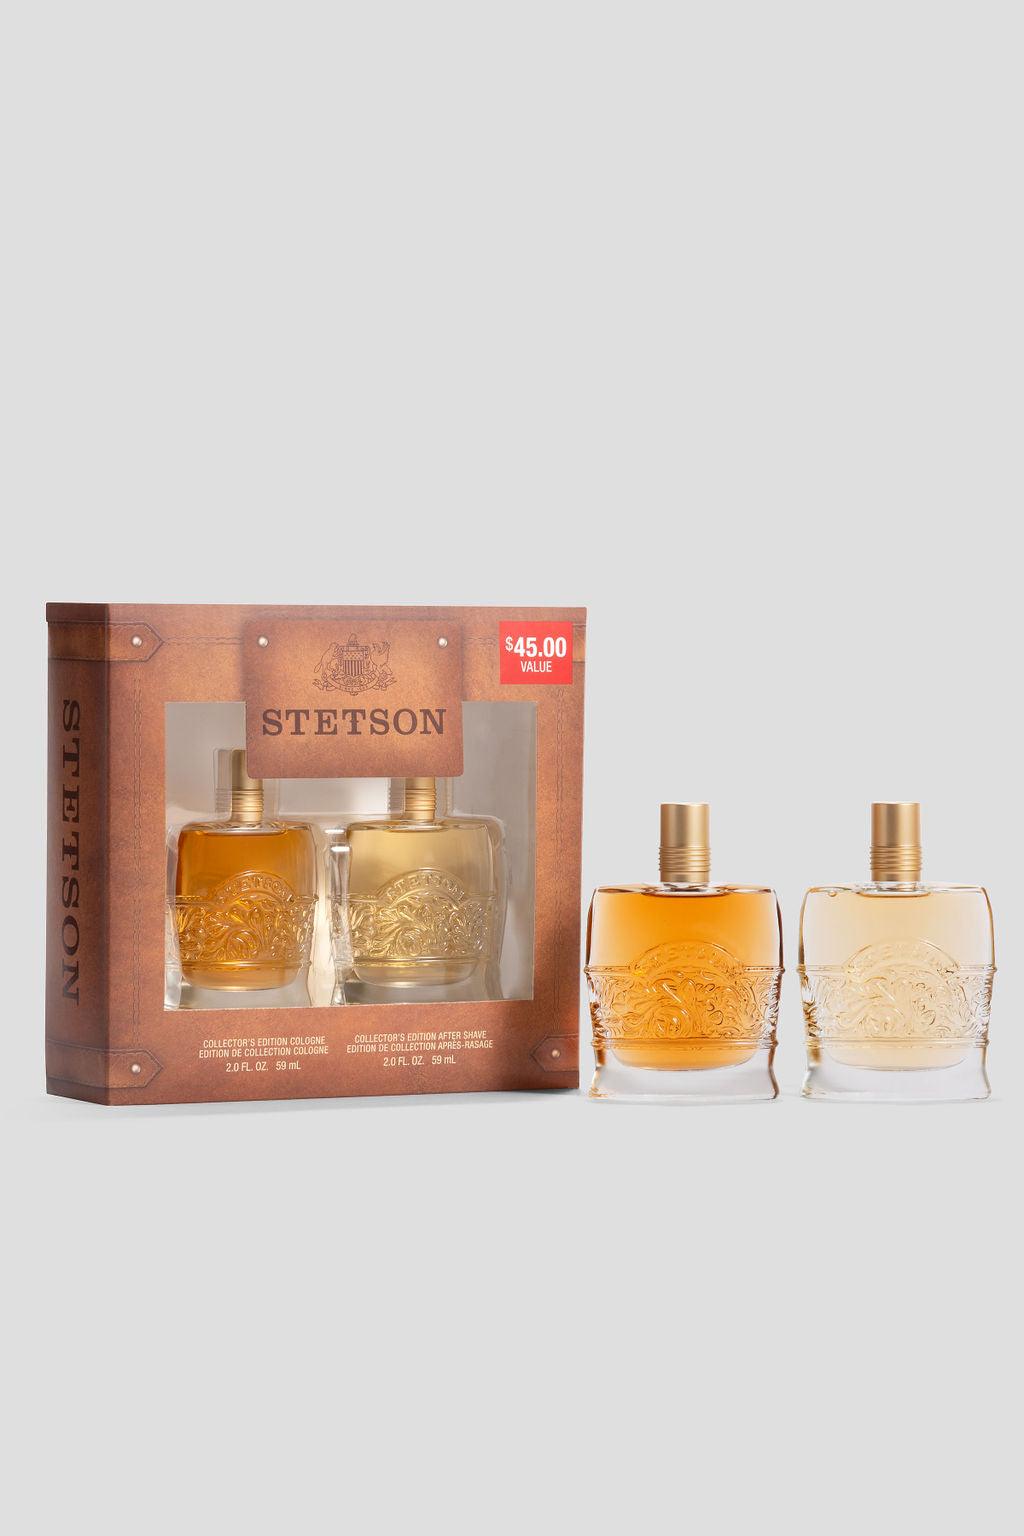 STETSON ORIGINAL AFTERSHAVE GIFT SET - SCENT BEAUTY